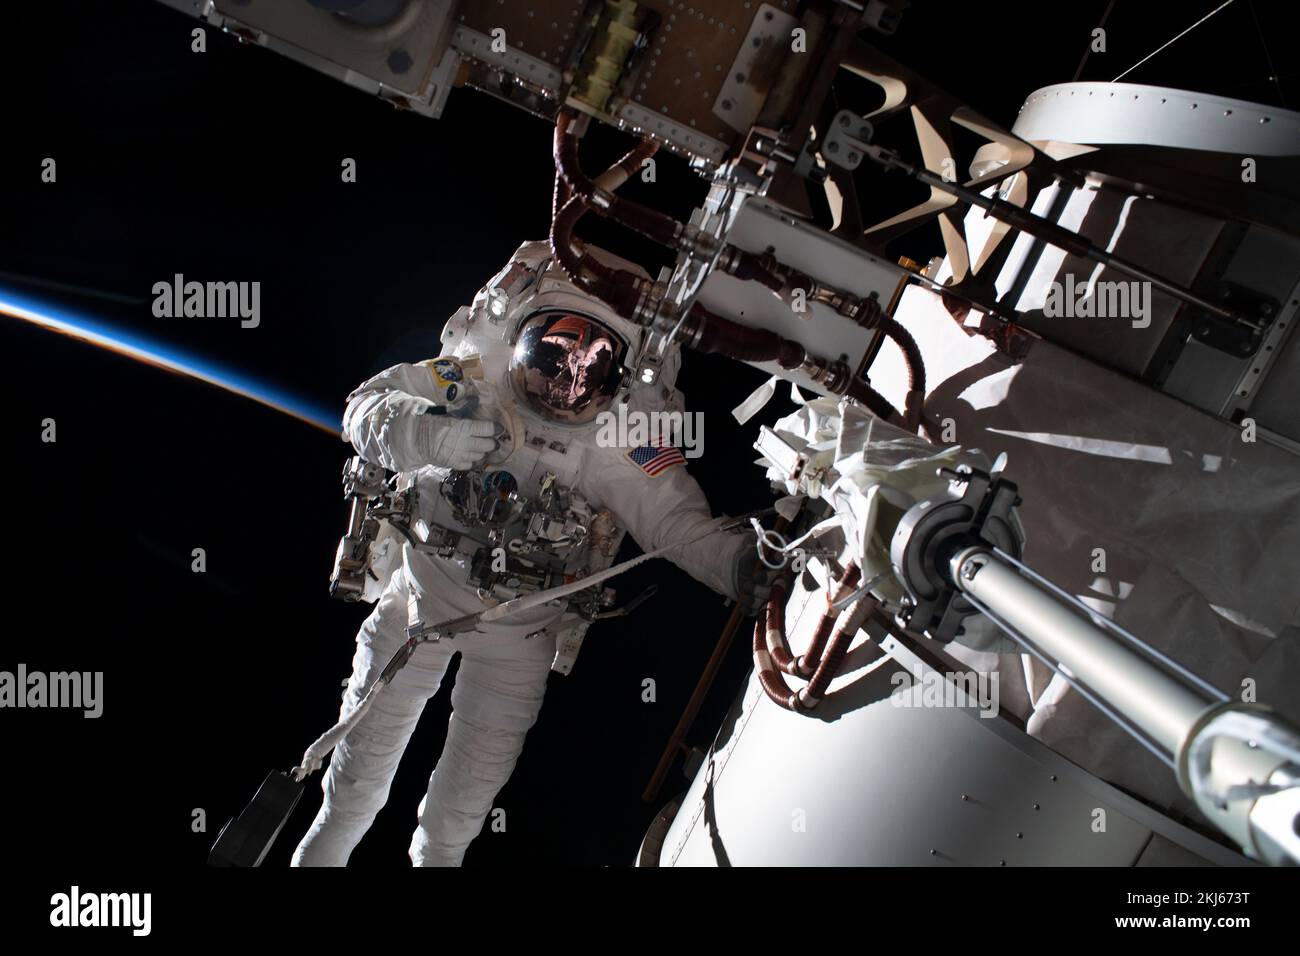 International Space Station, Earth Orbit. 15 November, 2022. NASA astronaut and Expedition 68 Flight Engineer Frank Rubio during a spacewalk outside the International Space Station, November 15, 2022 in Earth Orbit. The 7 hours and 11 minute spacewalk to assemble a mounting bracket was the first for Rubio and fellow astronaut Josh Cassada.  Credit: Josh Cassada/NASA/Alamy Live News Stock Photo